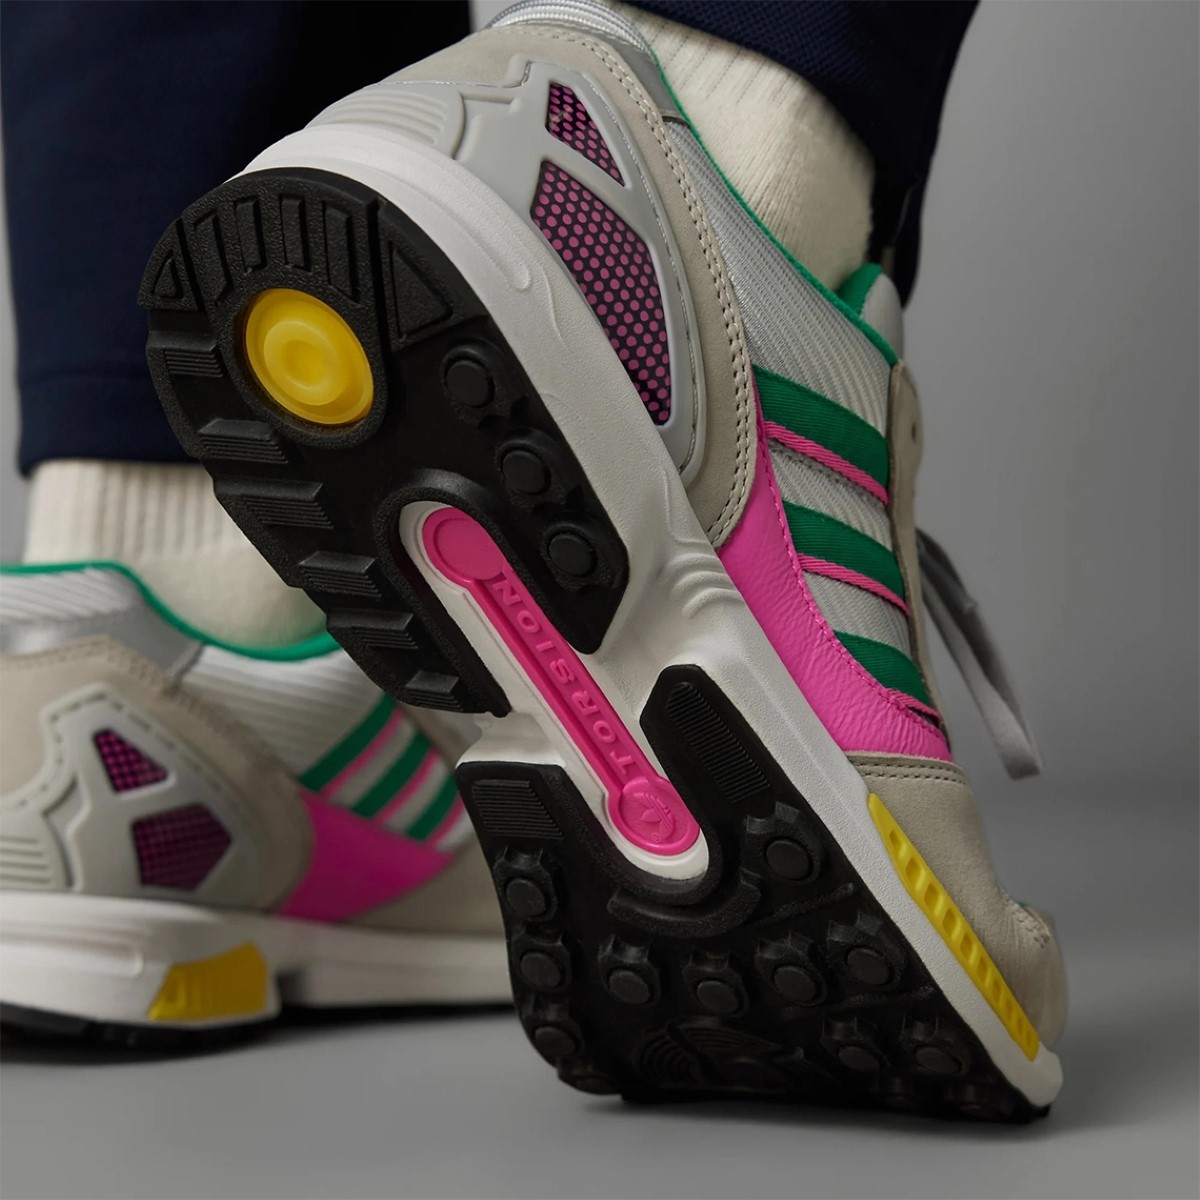 adidas ZX 8000 resplendent in pink and green